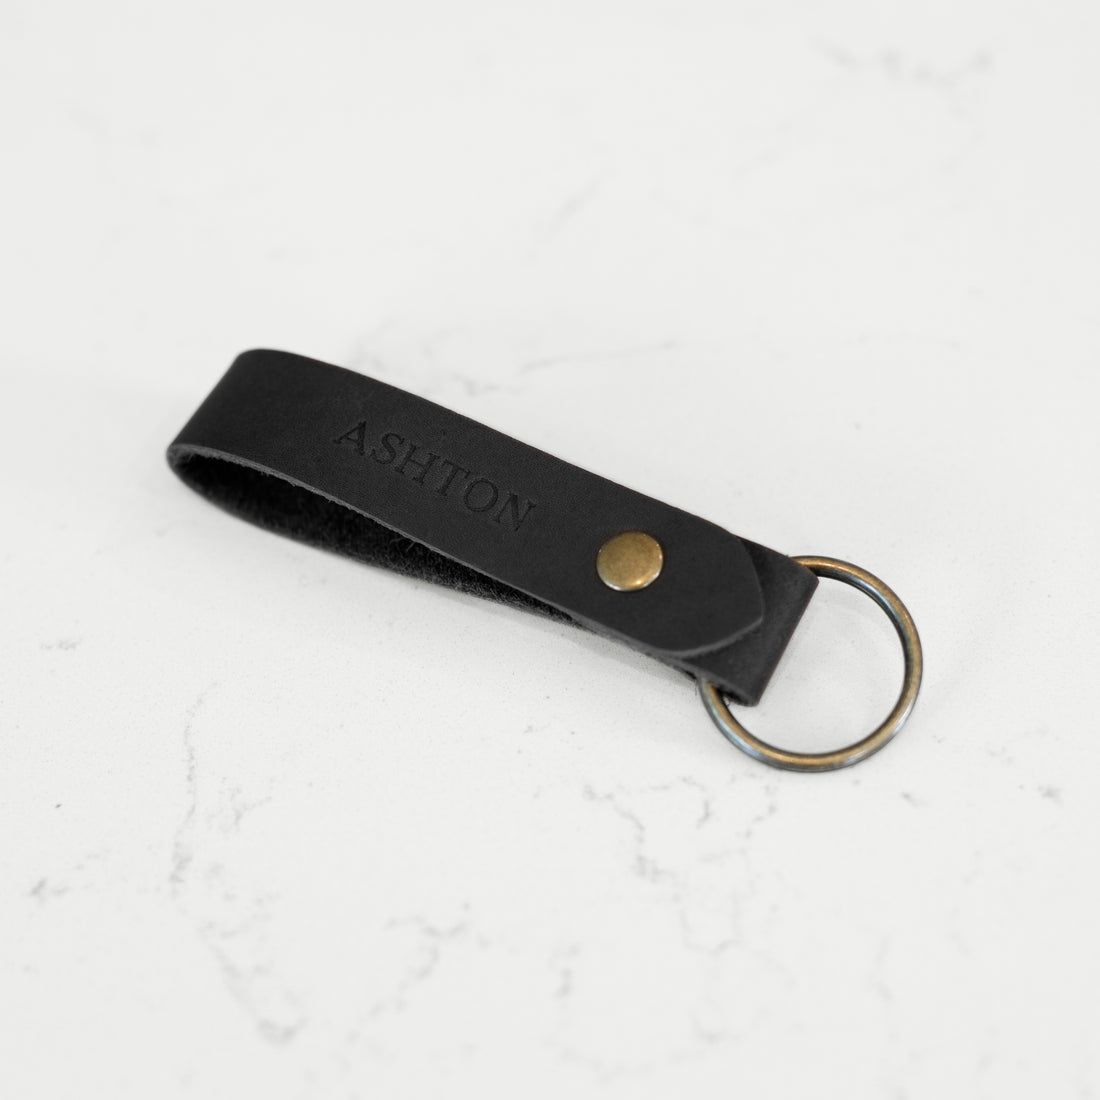 NorthwindSupply Personalized Leather Keychain L Monogrammed Leather Keychain USA Made Tan / Gold Foil / Silver